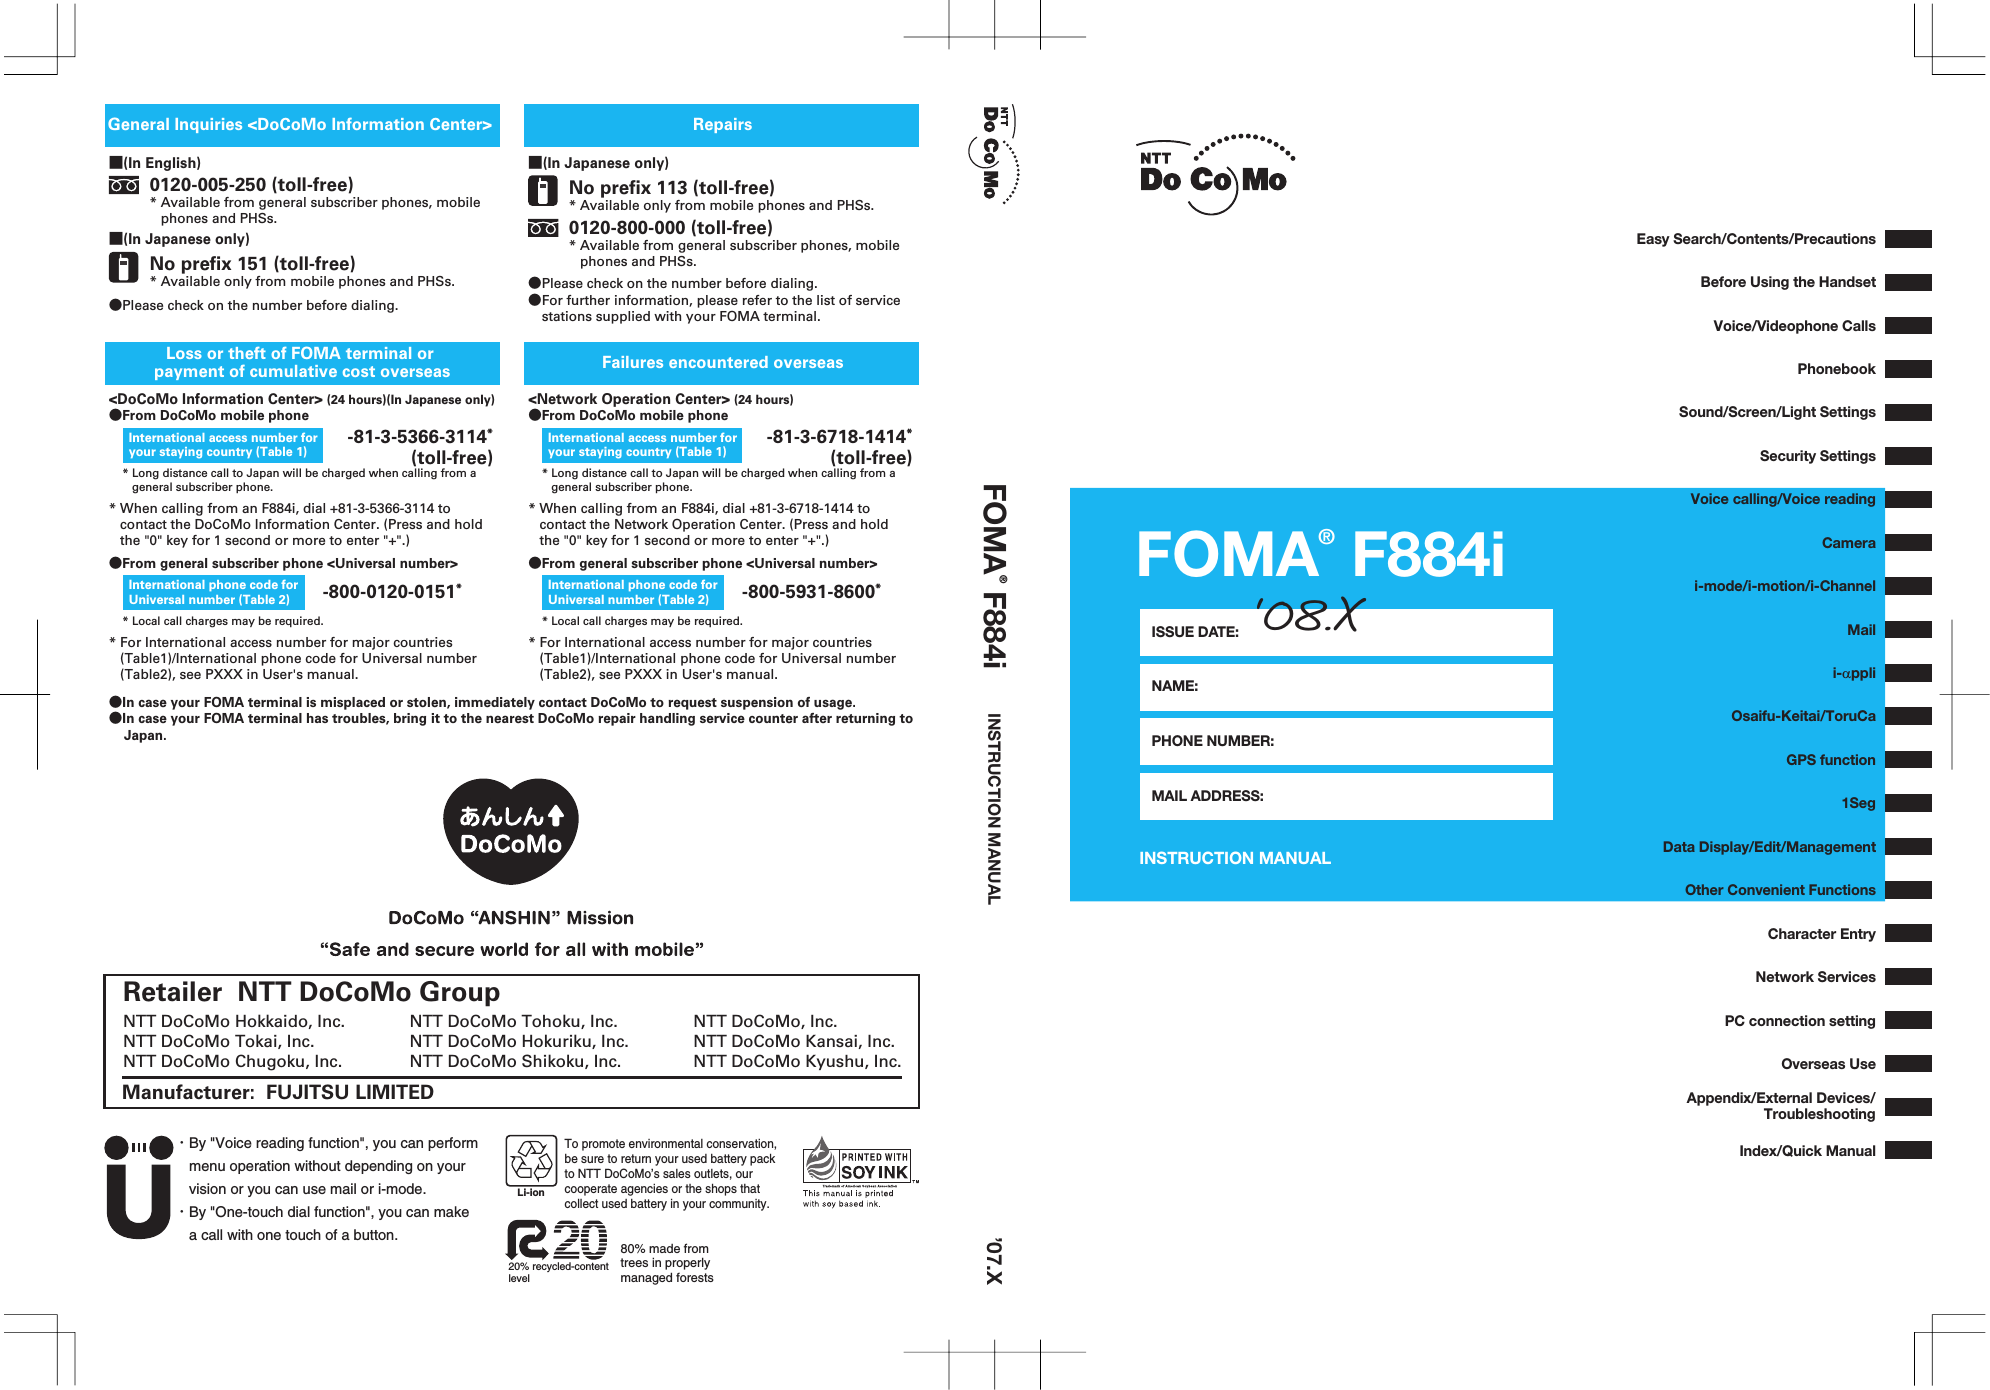 FOMA® F884iINSTRUCTION MANUALISSUE DATE:NAME:PHONE NUMBER:MAIL ADDRESS:‘08.X’07.XFOMA® F884i INSTRUCTION MANUAL・By &quot;Voice reading function&quot;, you can perform menu operation without depending on your vision or you can use mail or i-mode.・By &quot;One-touch dial function&quot;, you can make a call with one touch of a button.20% recycled-content level80% made from trees in properly managed forestsLi-ionTo promote environmental conservation, be sure to return your used battery pack to NTT DoCoMo’s sales outlets, our cooperate agencies or the shops thatcollect used battery in your community.Retailer  NTT DoCoMo GroupManufacturer:  FUJITSU LIMITEDNTT DoCoMo, Inc.NTT DoCoMo Kansai, Inc.NTT DoCoMo Kyushu, Inc.NTT DoCoMo Hokkaido, Inc.NTT DoCoMo Tokai, Inc.NTT DoCoMo Chugoku, Inc.NTT DoCoMo Tohoku, Inc.NTT DoCoMo Hokuriku, Inc.NTT DoCoMo Shikoku, Inc.■(In English)■(In Japanese only)0120-005-250 (toll-free)* Available from general subscriber phones, mobile    phones and PHSs.No prefix 151 (toll-free)* Available only from mobile phones and PHSs.■(In Japanese only)No prefix 113 (toll-free)* Available only from mobile phones and PHSs.●Please check on the number before dialing.●For further information, please refer to the list of service  stations supplied with your FOMA terminal. 0120-800-000 (toll-free)* Available from general subscriber phones, mobile    phones and PHSs.RepairsFailures encountered overseasGeneral Inquiries &lt;DoCoMo Information Center&gt; &lt;DoCoMo Information Center&gt; (24 hours)(In Japanese only)* Long distance call to Japan will be charged when calling from a    general subscriber phone.* Long distance call to Japan will be charged when calling from a    general subscriber phone.●From DoCoMo mobile phone&lt;Network Operation Center&gt; (24 hours)●From DoCoMo mobile phone* When calling from an F884i, dial +81-3-5366-3114 to    contact the DoCoMo Information Center. (Press and hold    the &quot;0&quot; key for 1 second or more to enter &quot;+&quot;.)* When calling from an F884i, dial +81-3-6718-1414 to    contact the Network Operation Center. (Press and hold    the &quot;0&quot; key for 1 second or more to enter &quot;+&quot;.)* For International access number for major countries    (Table1)/International phone code for Universal number    (Table2), see PXXX in User&apos;s manual.* For International access number for major countries    (Table1)/International phone code for Universal number    (Table2), see PXXX in User&apos;s manual.International access number for your staying country (Table 1)International access number for your staying country (Table 1) -81-3-6718-1414* (toll-free)Loss or theft of FOMA terminal or payment of cumulative cost overseas-800-0120-0151** Local call charges may be required. * Local call charges may be required.International phone code for Universal number (Table 2) -800-5931-8600*International phone code for Universal number (Table 2)●From general subscriber phone &lt;Universal number&gt; ●From general subscriber phone &lt;Universal number&gt;●In case your FOMA terminal is misplaced or stolen, immediately contact DoCoMo to request suspension of usage.●In case your FOMA terminal has troubles, bring it to the nearest DoCoMo repair handling service counter after returning to     Japan.-81-3-5366-3114* (toll-free)●Please check on the number before dialing.Voice/Videophone CallsVoice calling/Voice readingData Display/Edit/ManagementOther Convenient FunctionsNetwork ServicesIndex/Quick ManualAppendix/External Devices/TroubleshootingEasy Search/Contents/PrecautionsBefore Using the HandsetPhonebookSound/Screen/Light SettingsSecurity SettingsCamerai-mode/i-motion/i-ChannelMaili-αppliGPS function1SegOsaifu-Keitai/ToruCaPC connection settingOverseas UseCharacter Entry